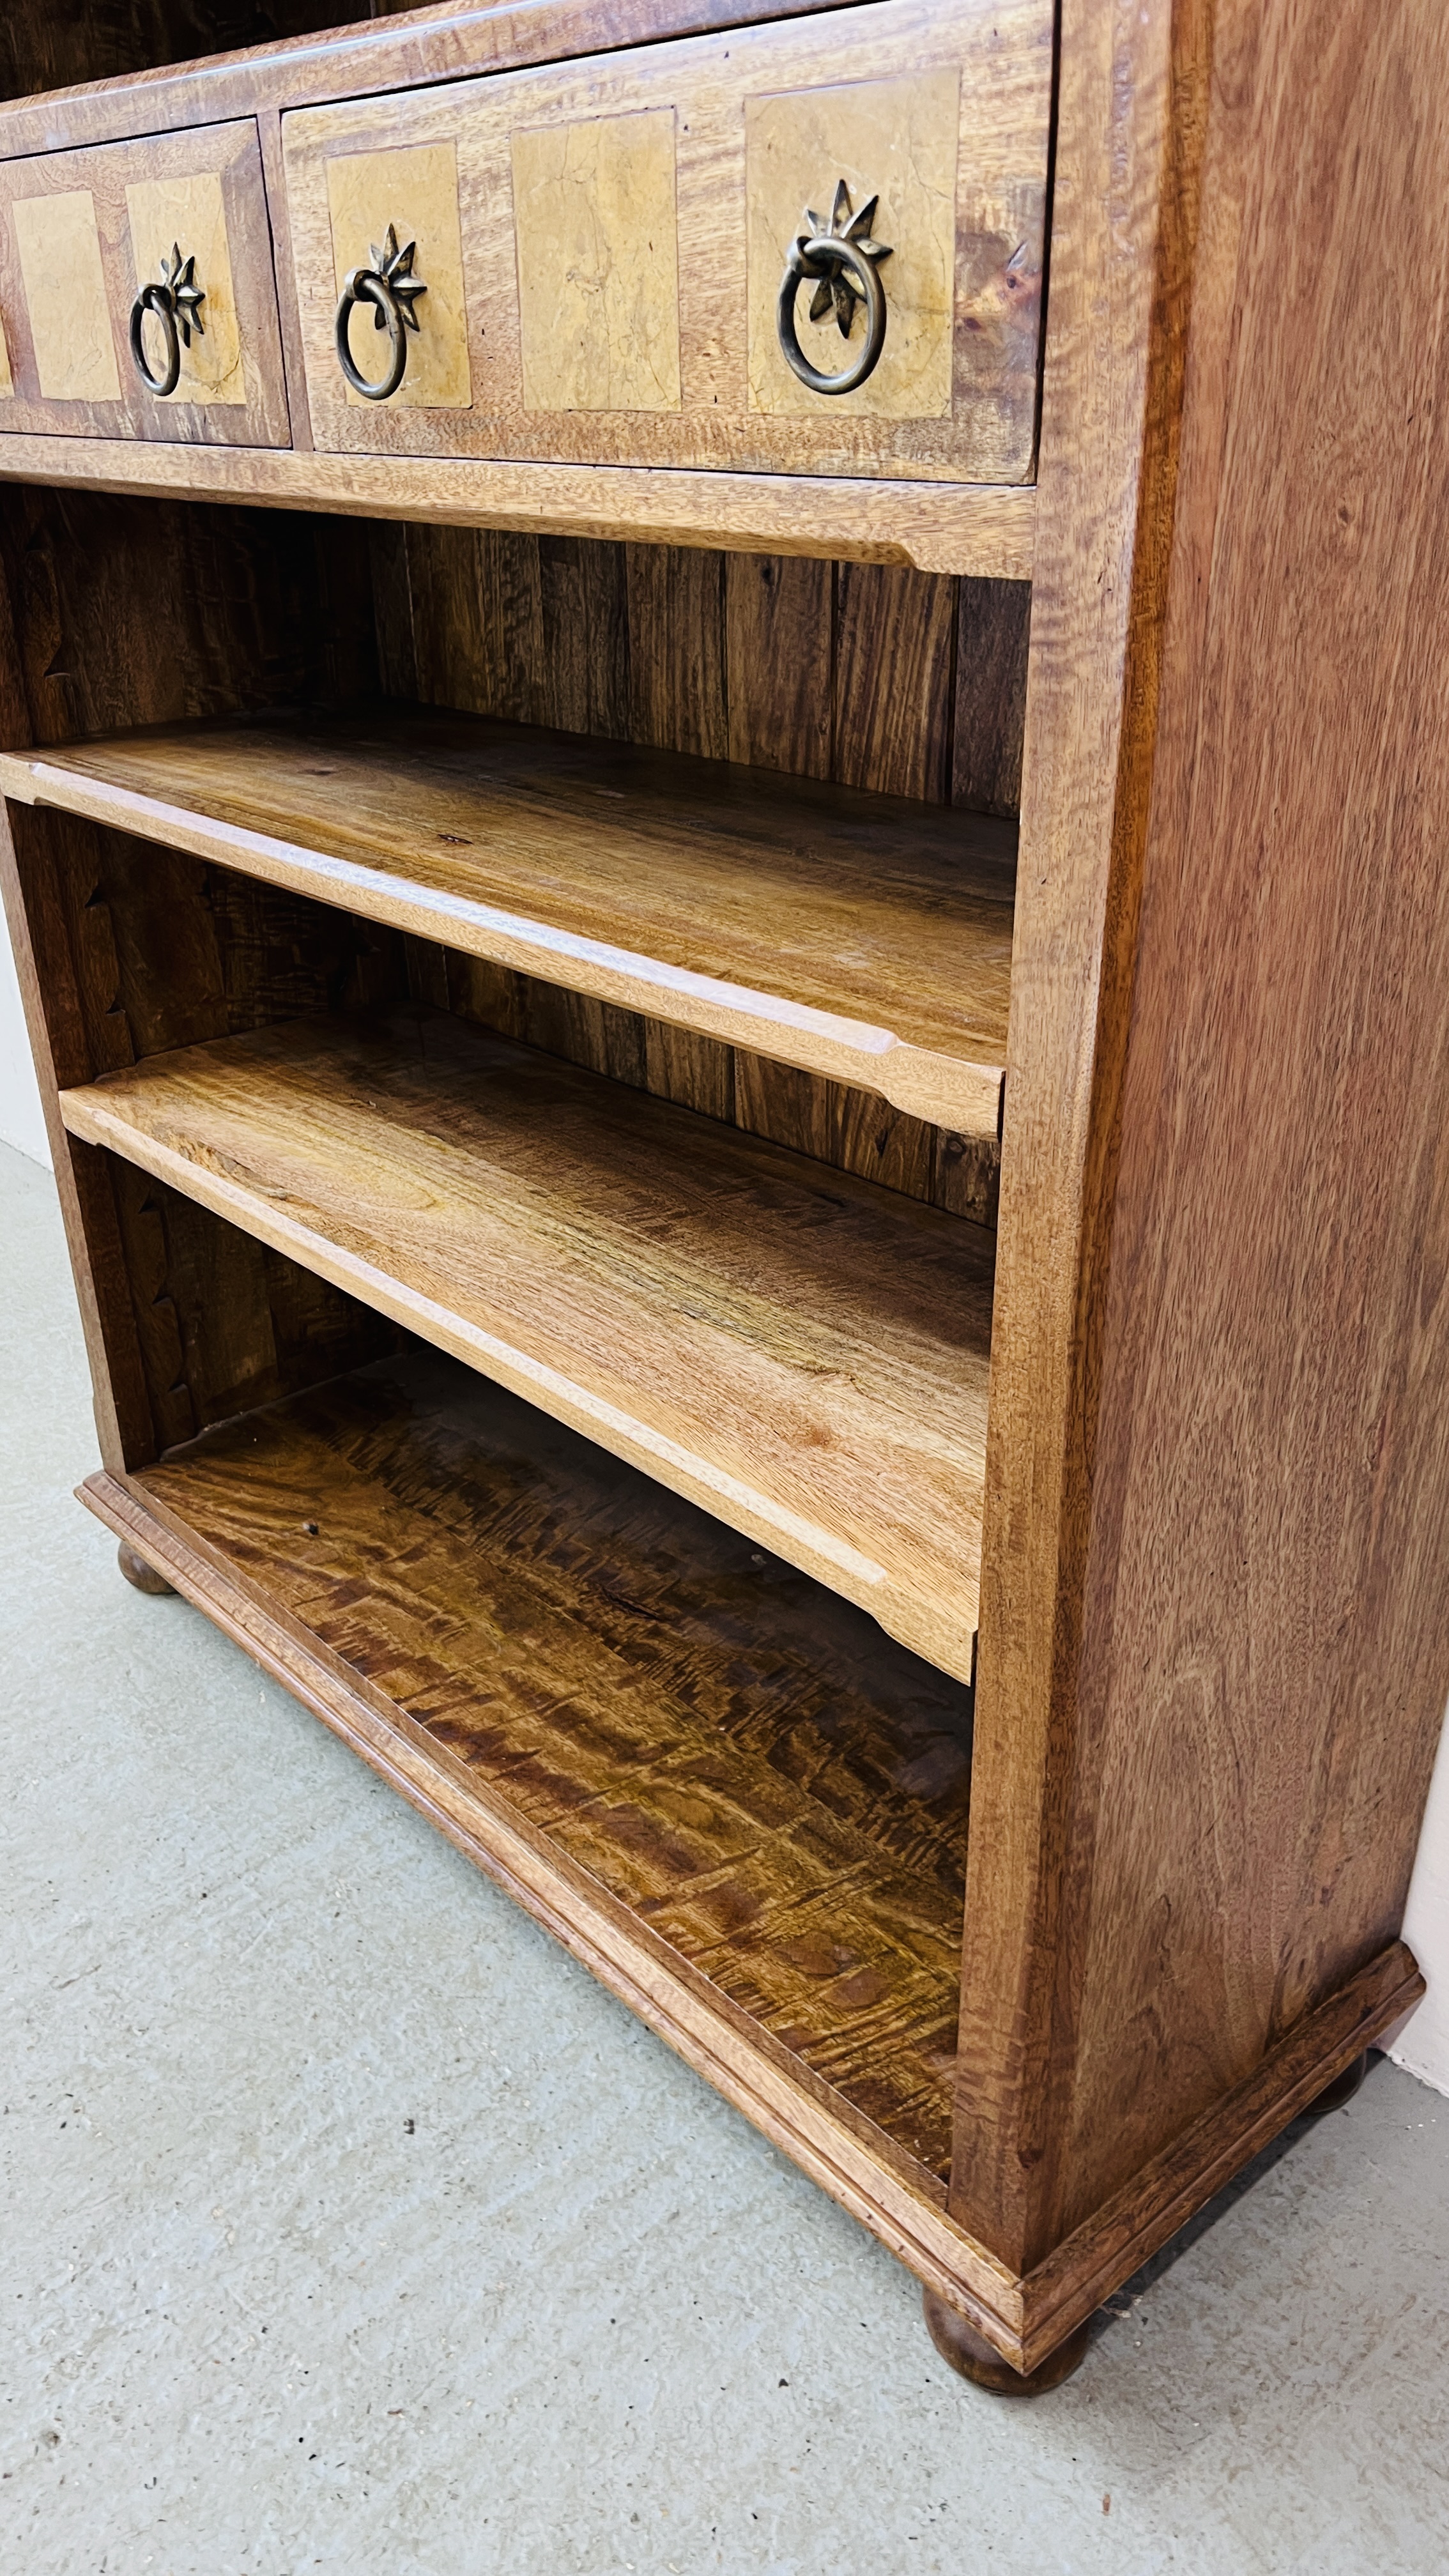 BAKER BEDFORD STYLE FLAGSTORE TWO DRAWER BOOKSHELF WITH ADJUSTABLE SHELVES HEIGHT 190CM. - Image 5 of 7